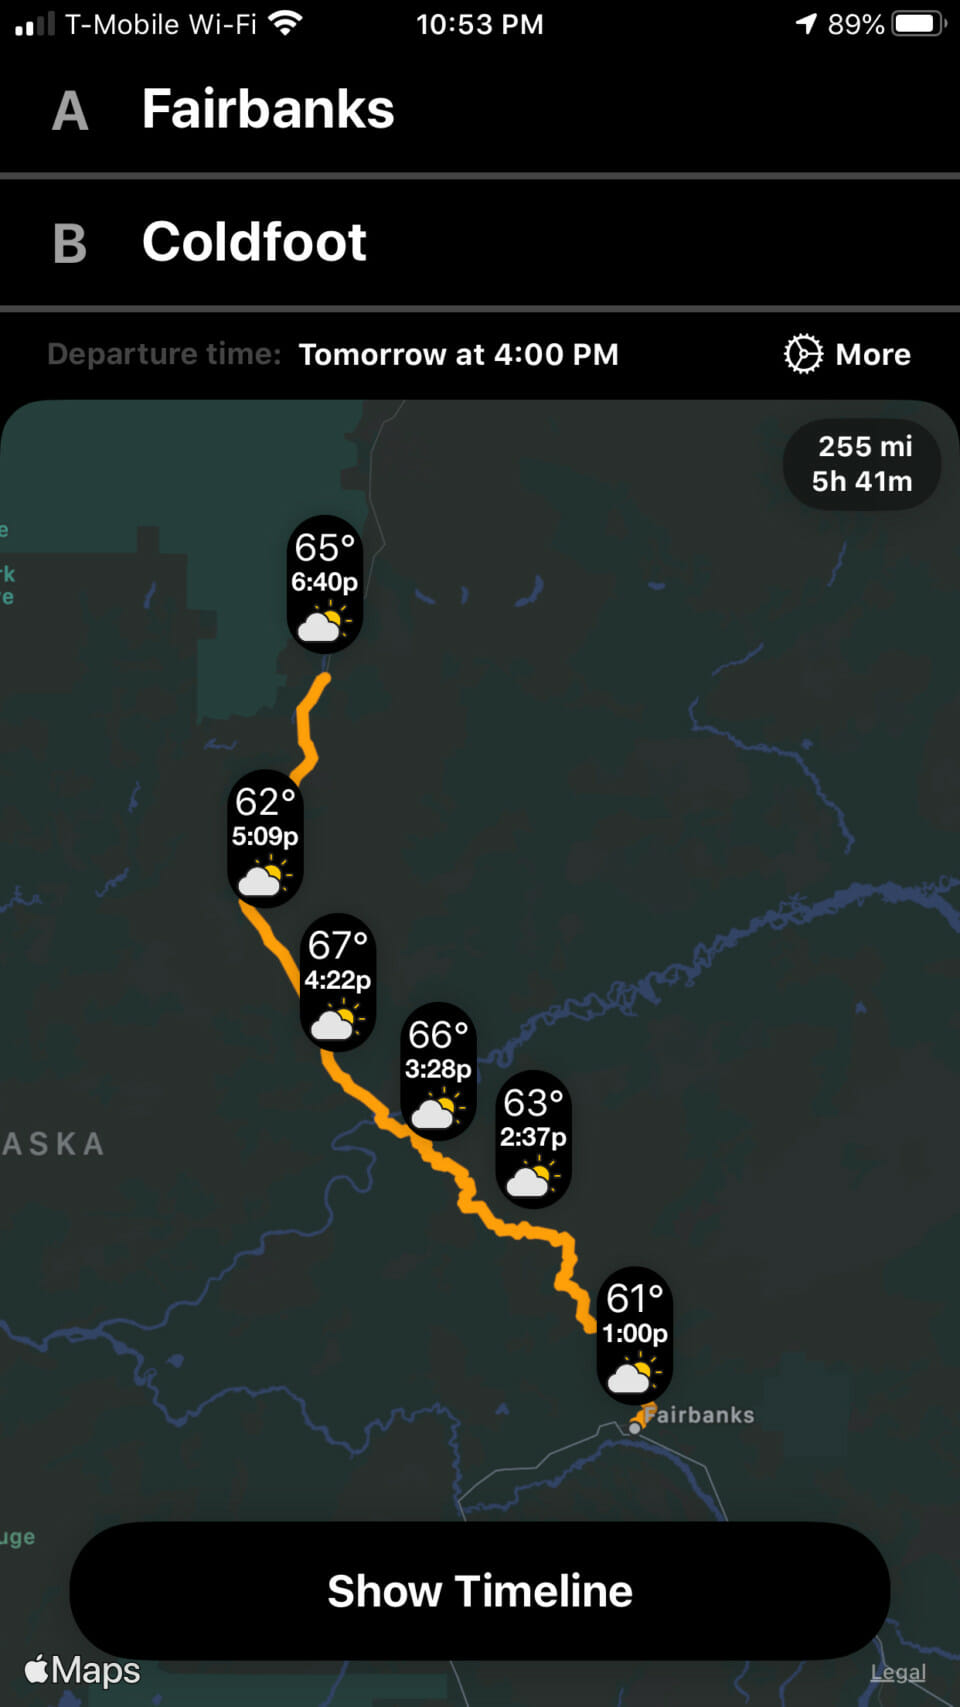 Fairbanks to Coldfoot